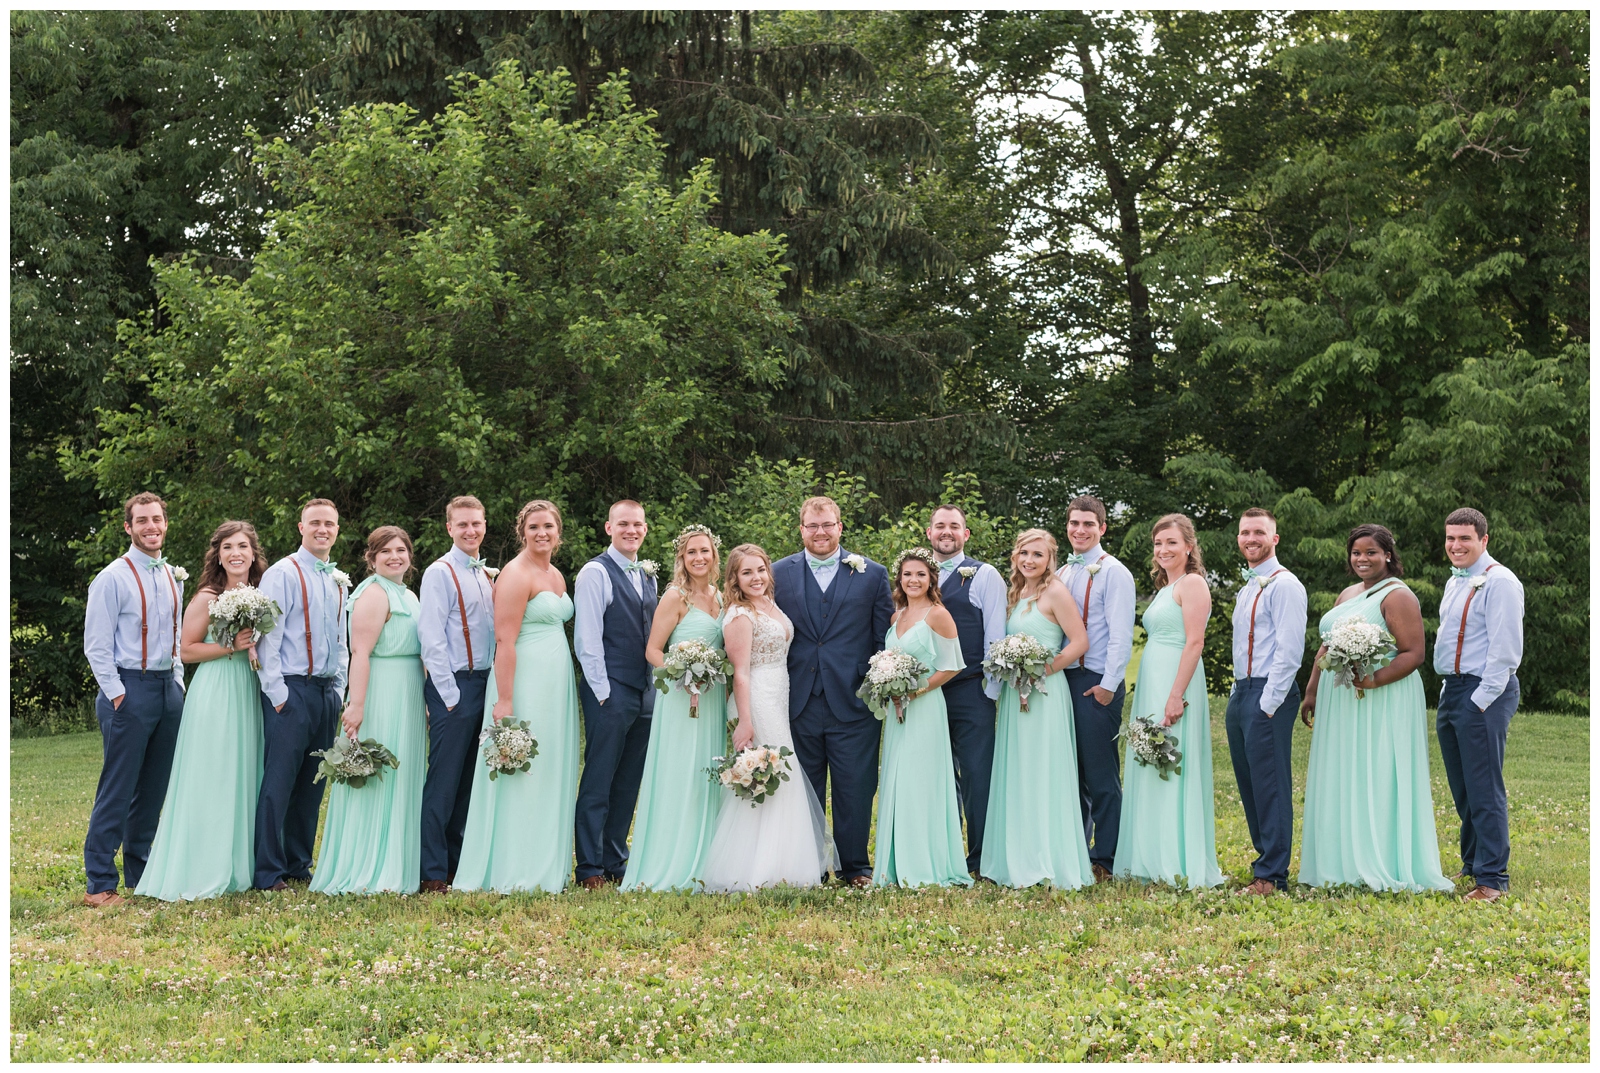 bridal party poses at EagleSticks Golf Club in mint gowns